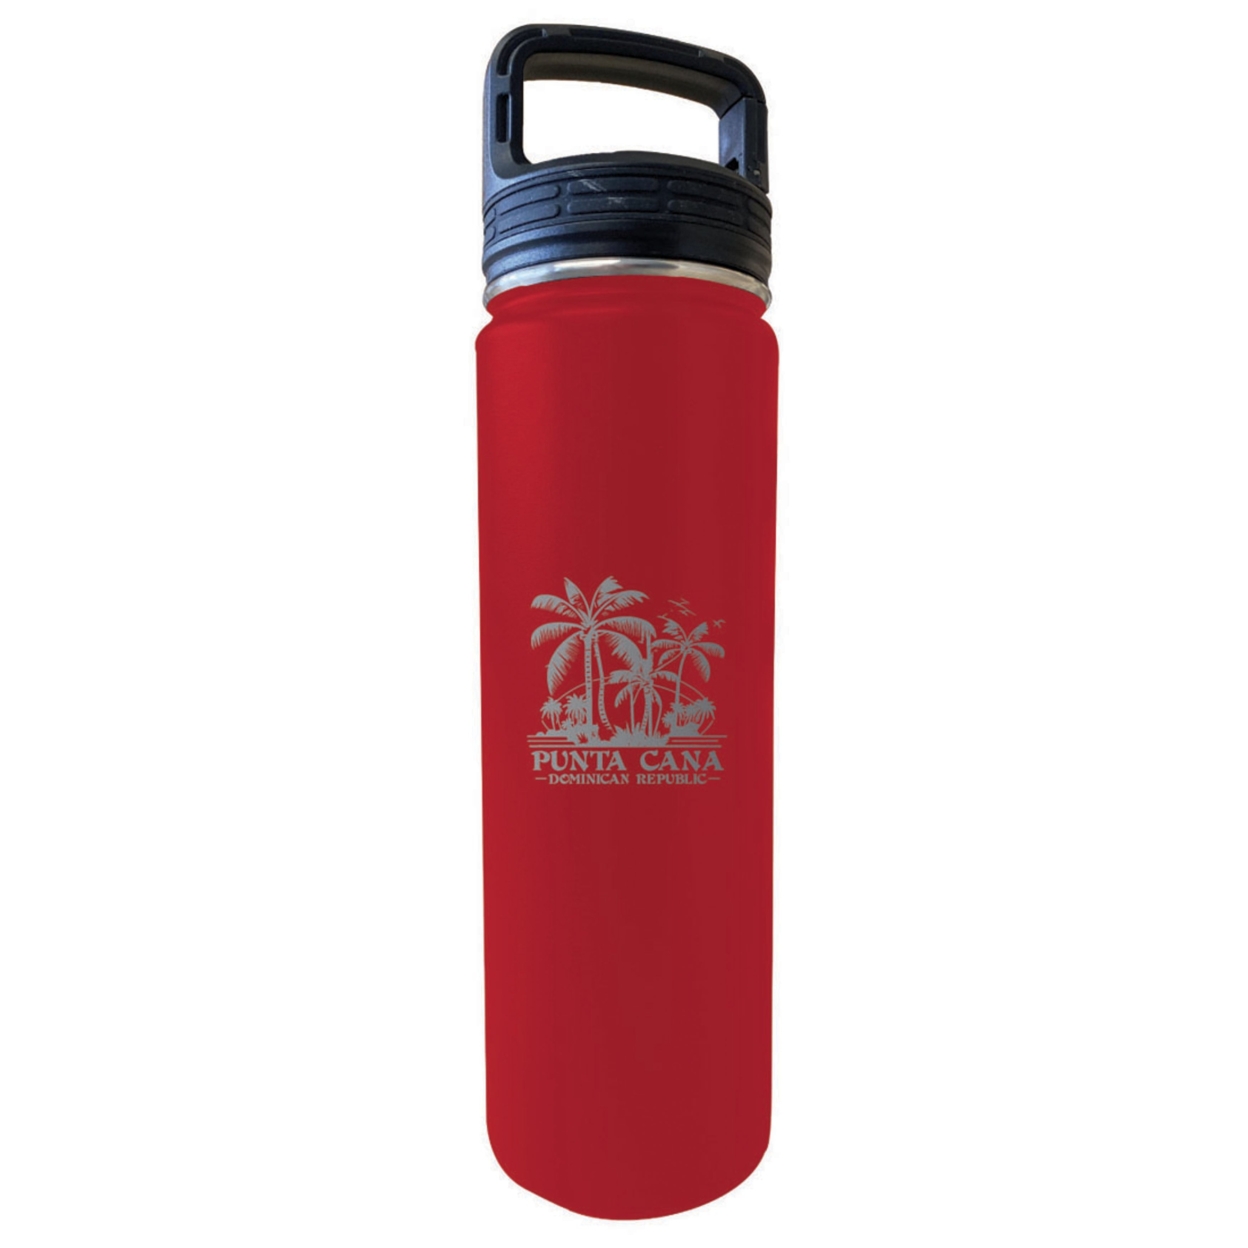 Punta Cana Dominican Republic Souvenir 32 Oz Insulated Stainless Steel Tumbler - Navy, Parrot 2